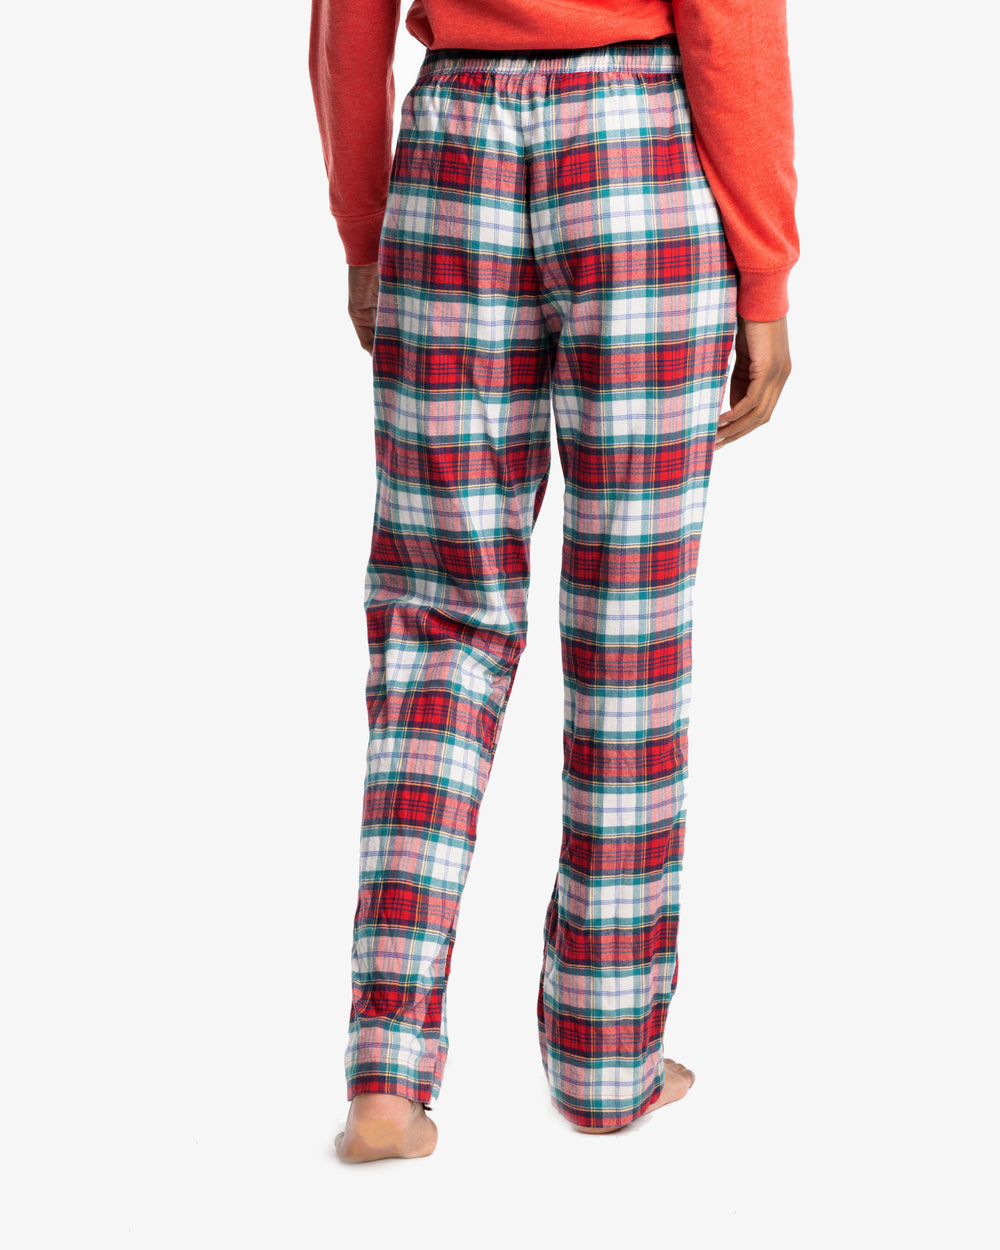 The back view of the Southern Tide Women's Pinedrop Plaid Lounge Pant by Southern Tide - Charleston Red